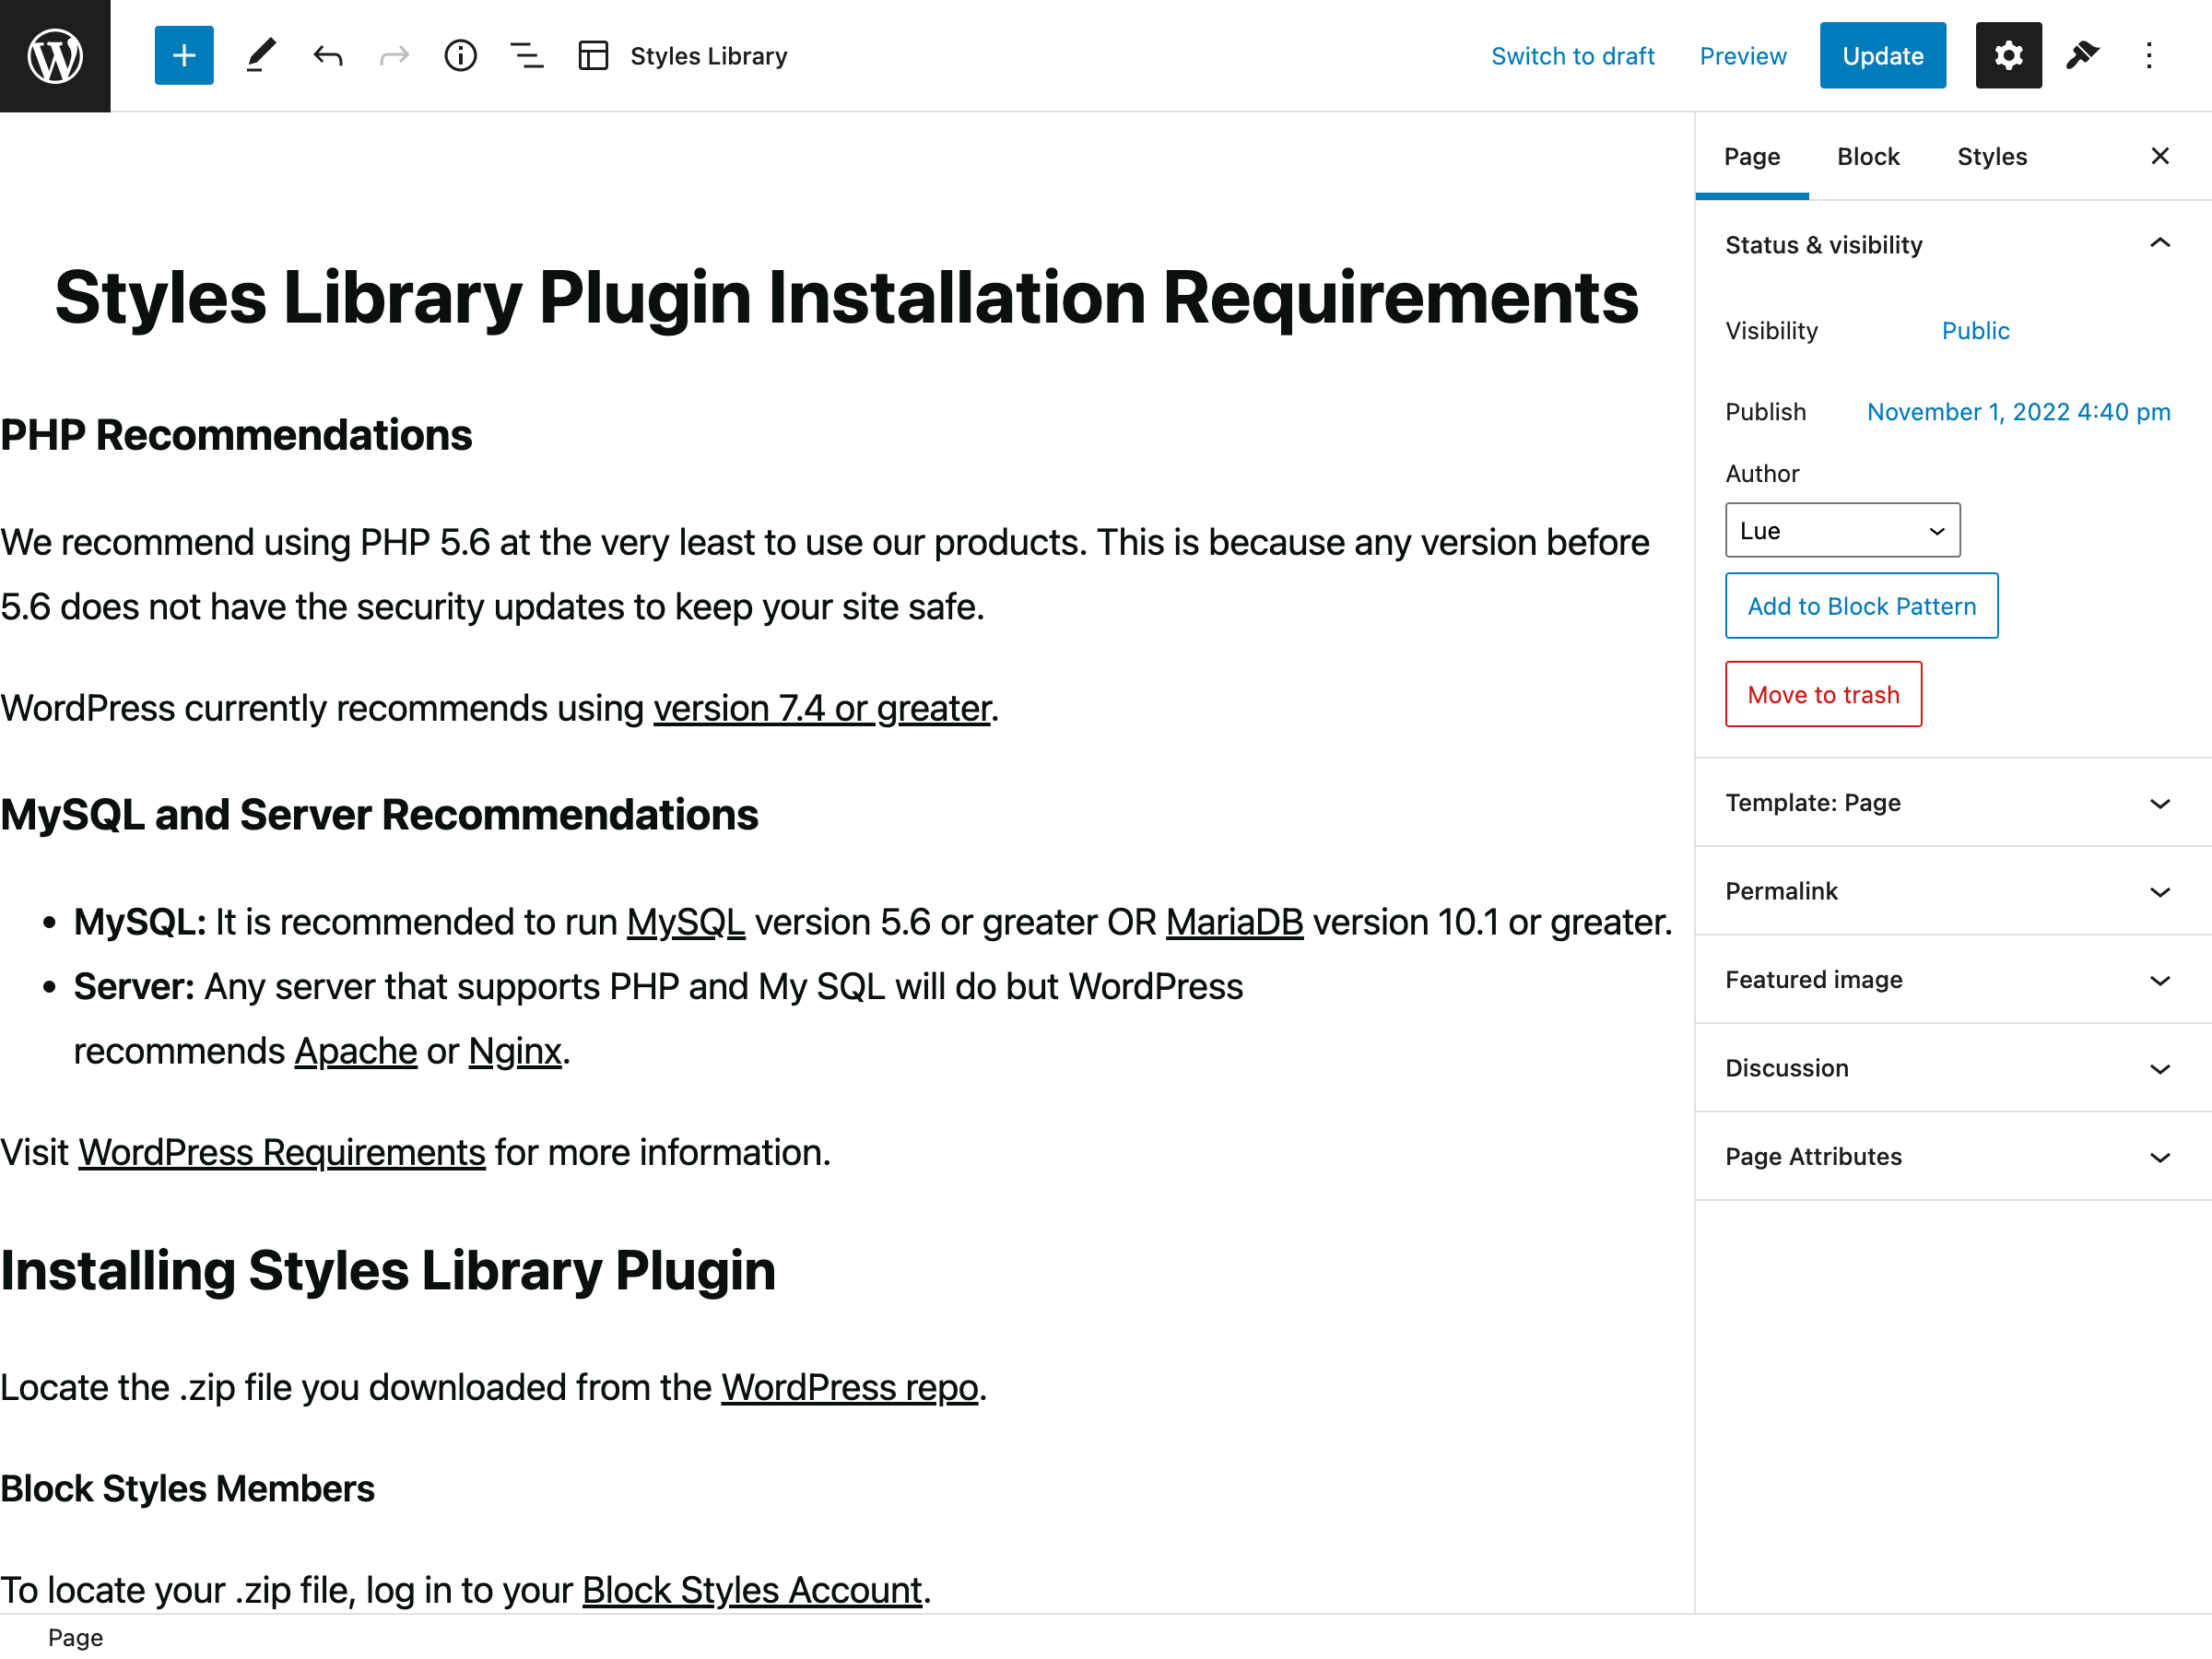 WordPress Styles Library installation page for Block Styles.